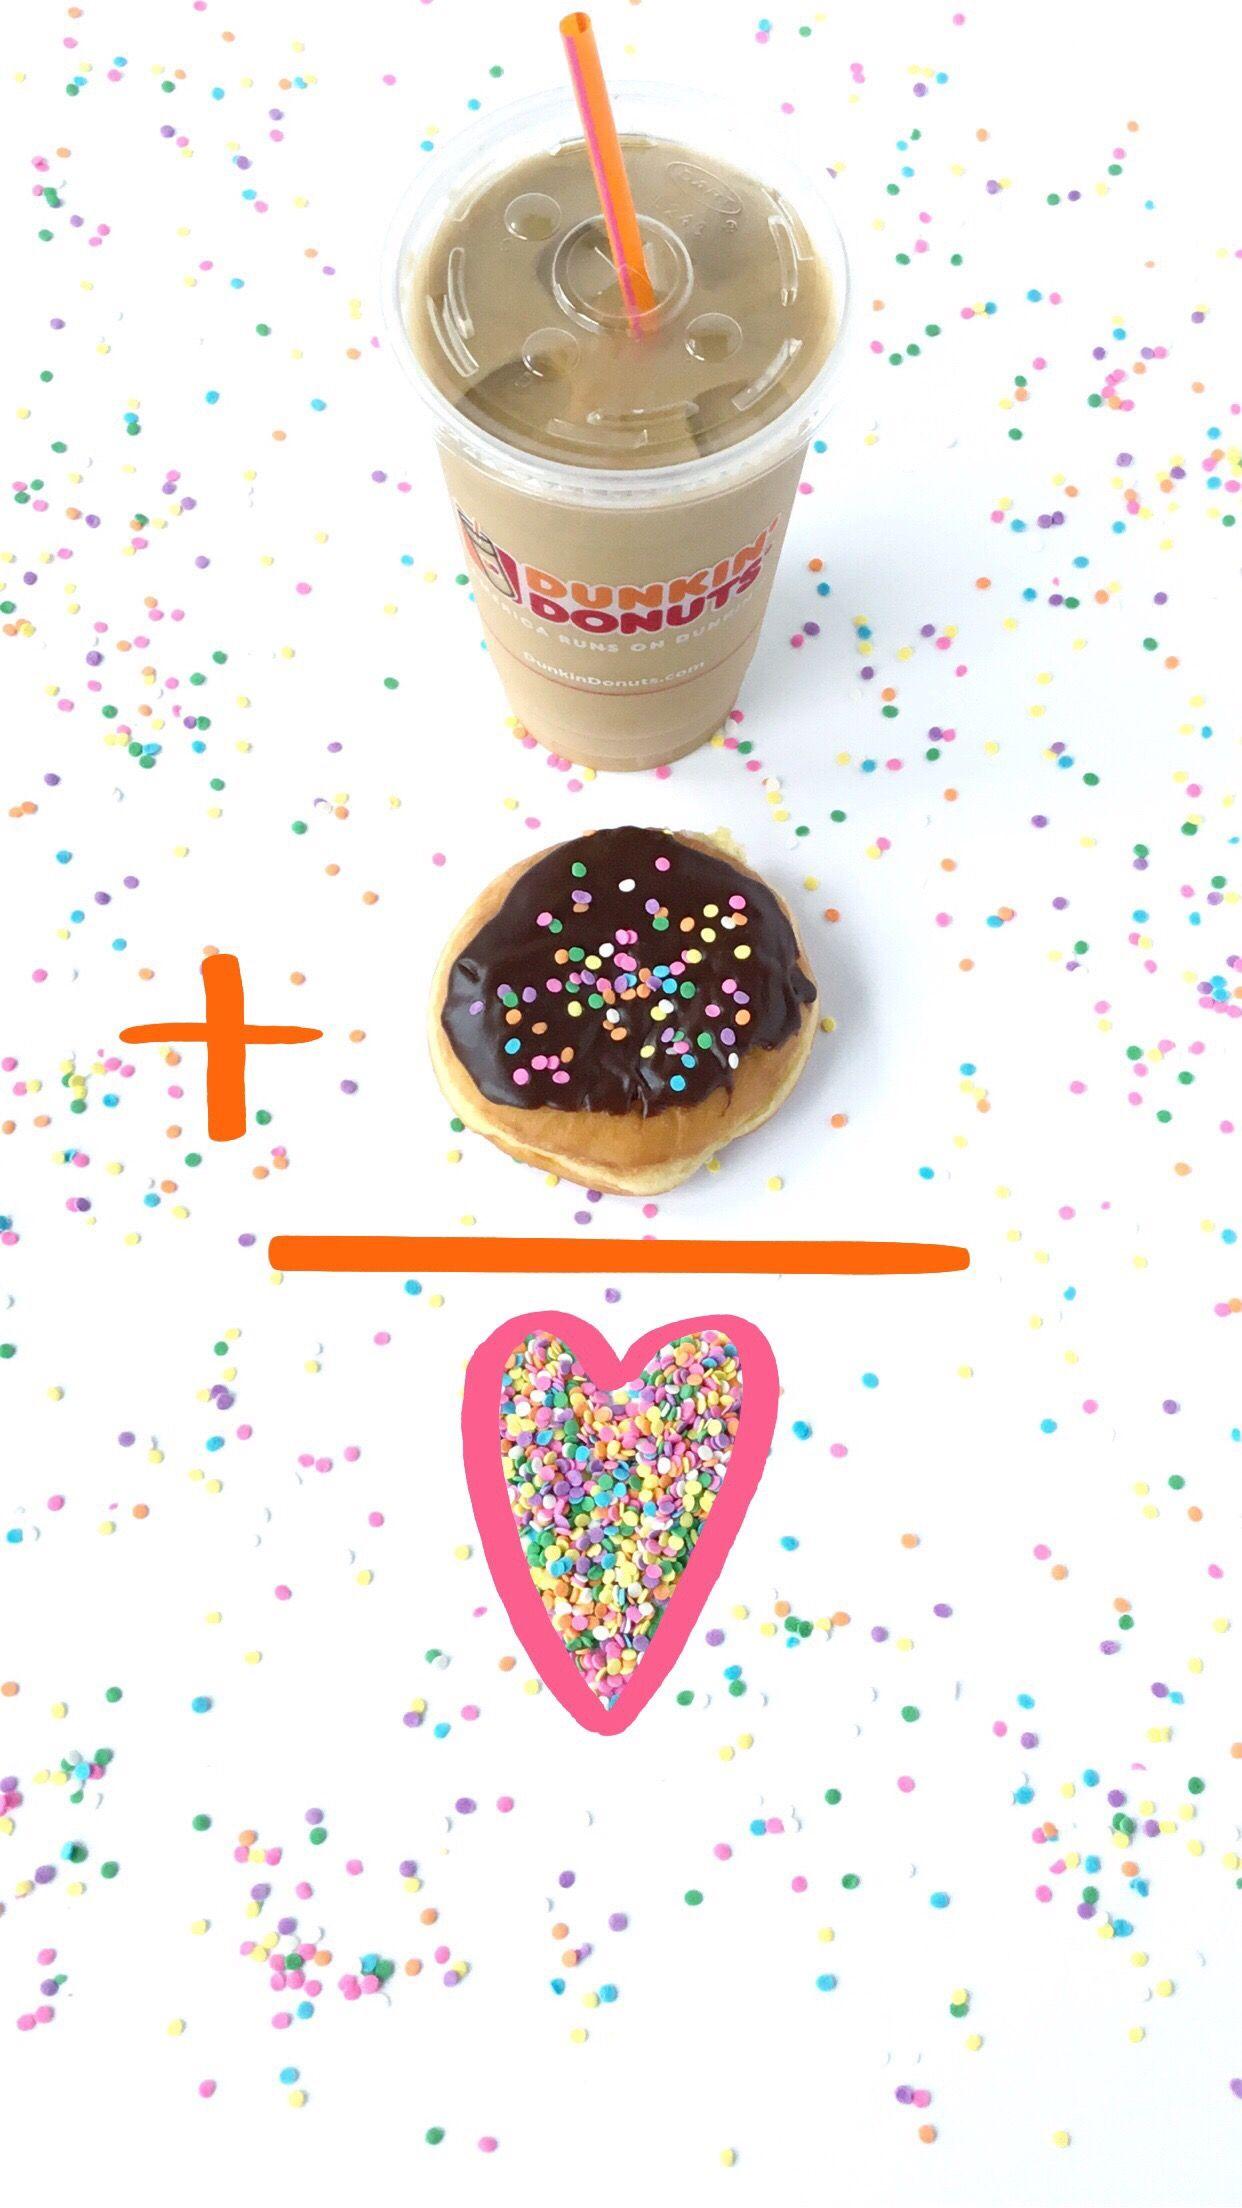 Dunkin Donuts Pictures  Download Free Images on Unsplash